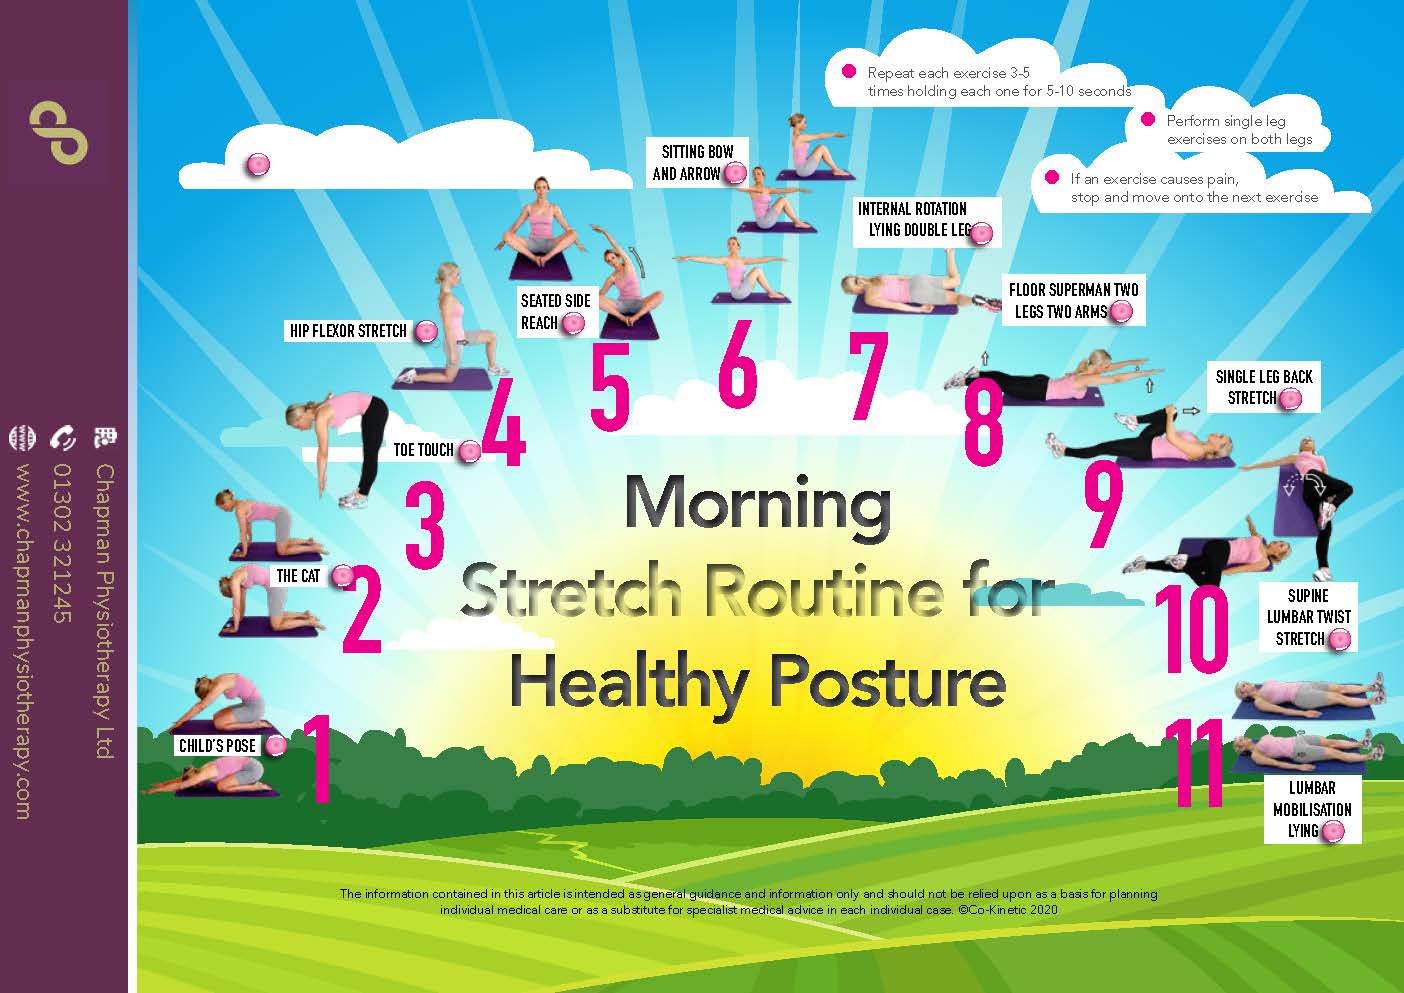 Morning Stretch Routine for a Healthy Posture